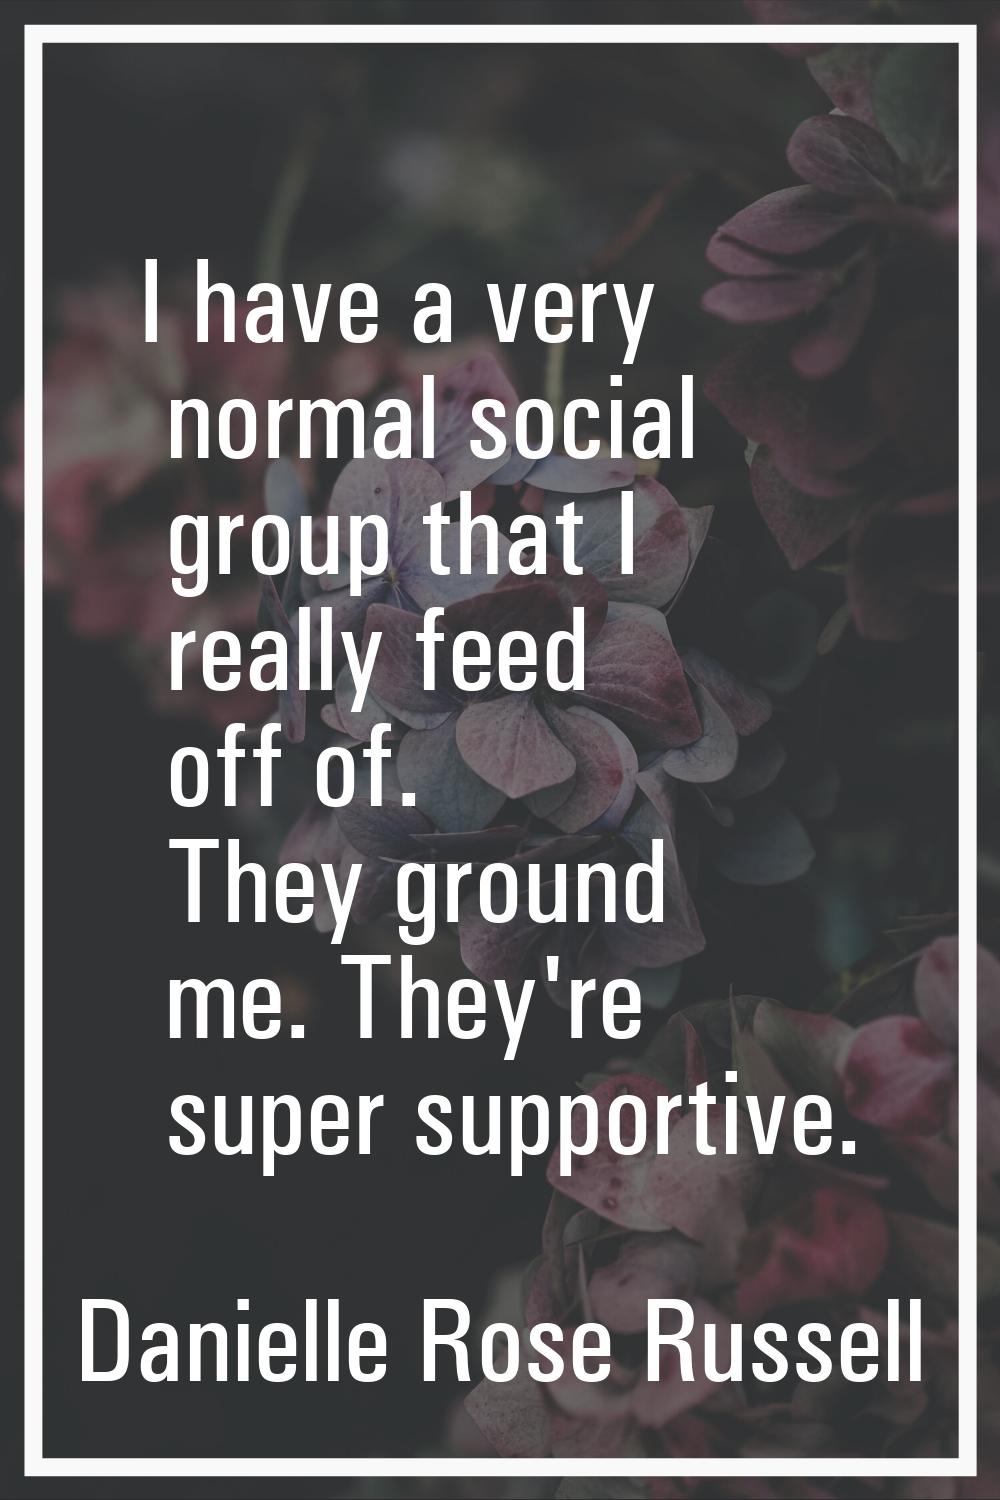 I have a very normal social group that I really feed off of. They ground me. They're super supporti